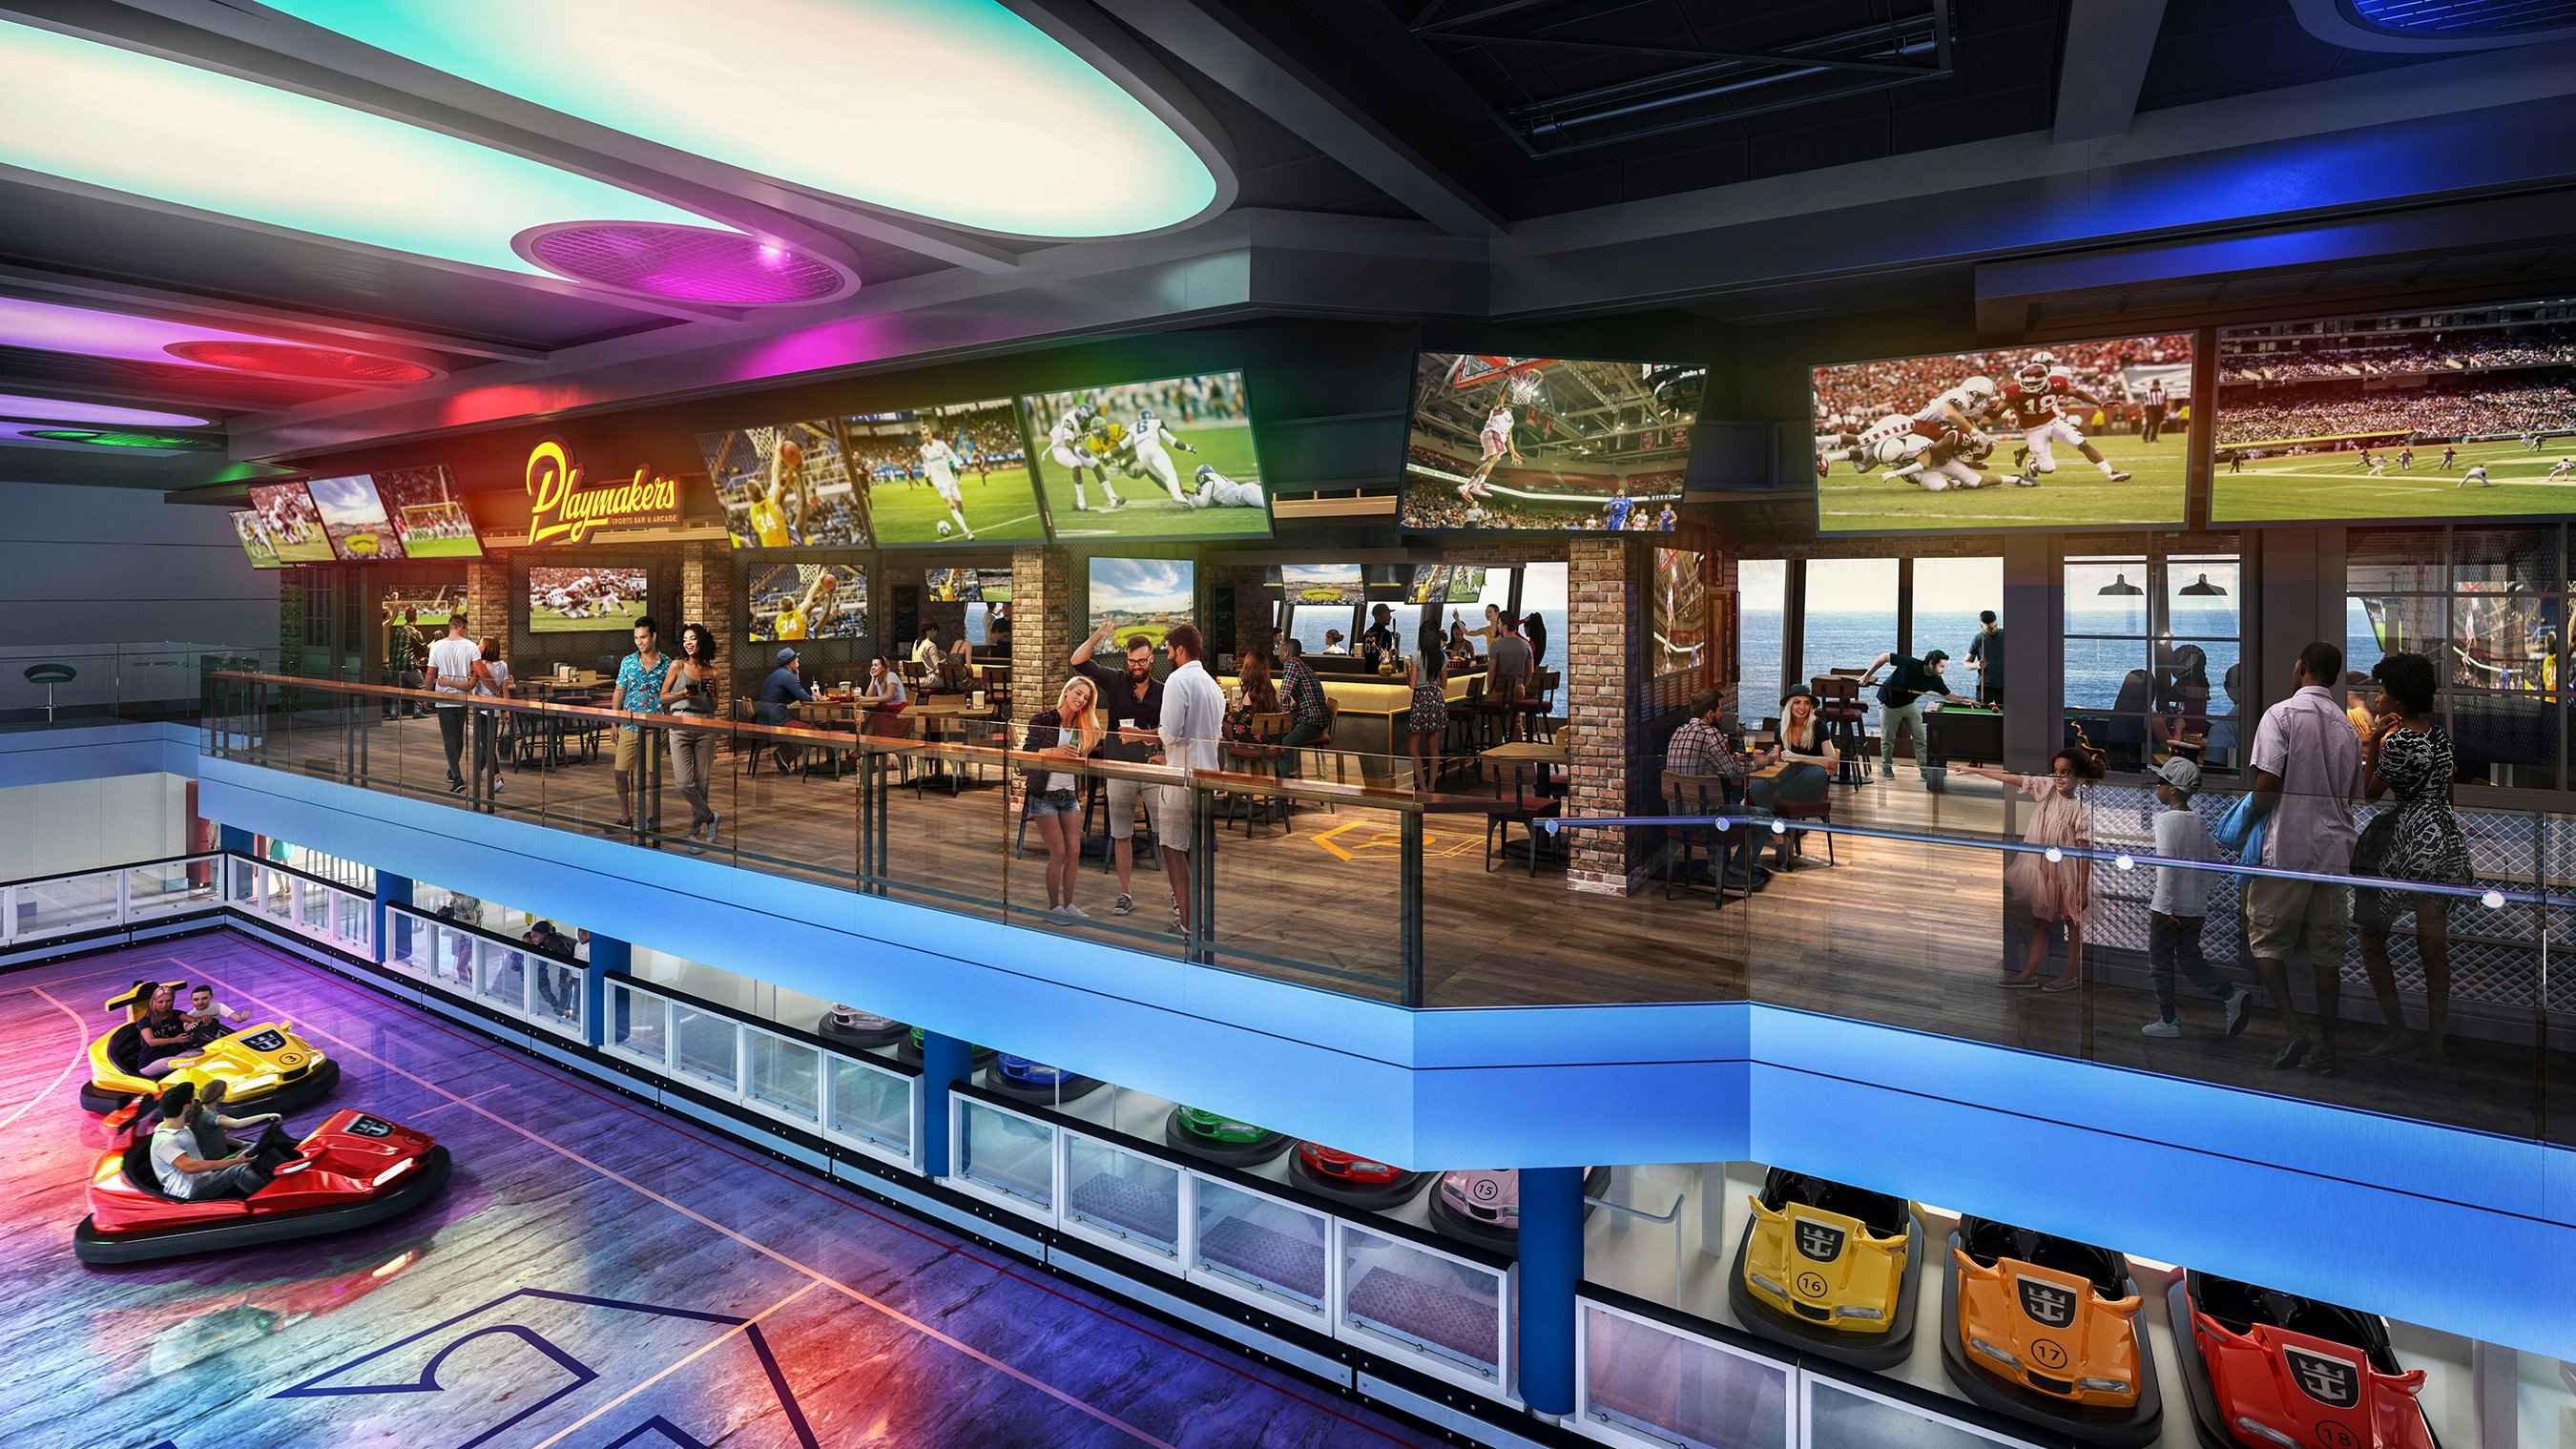 The Seaplex deck on the Odyssey of the Seas cruise ship, with bumper cars and screens showing various sports.